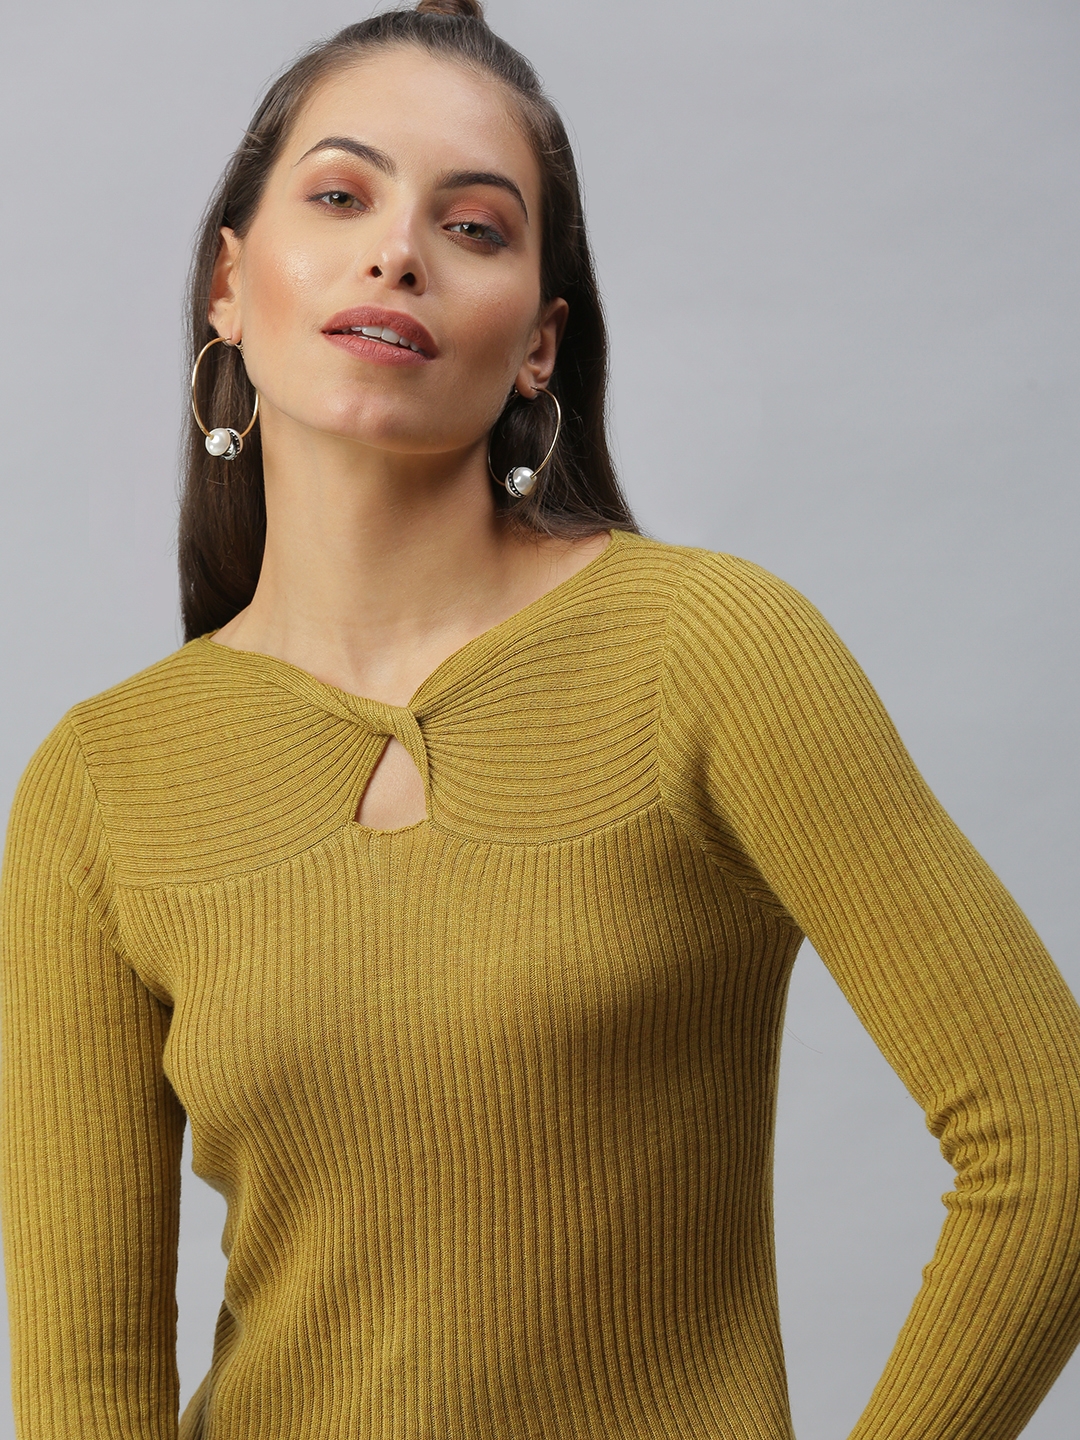 Showoff | SHOWOFF Women's Keyhole Neck Solid Yellow Regular Top